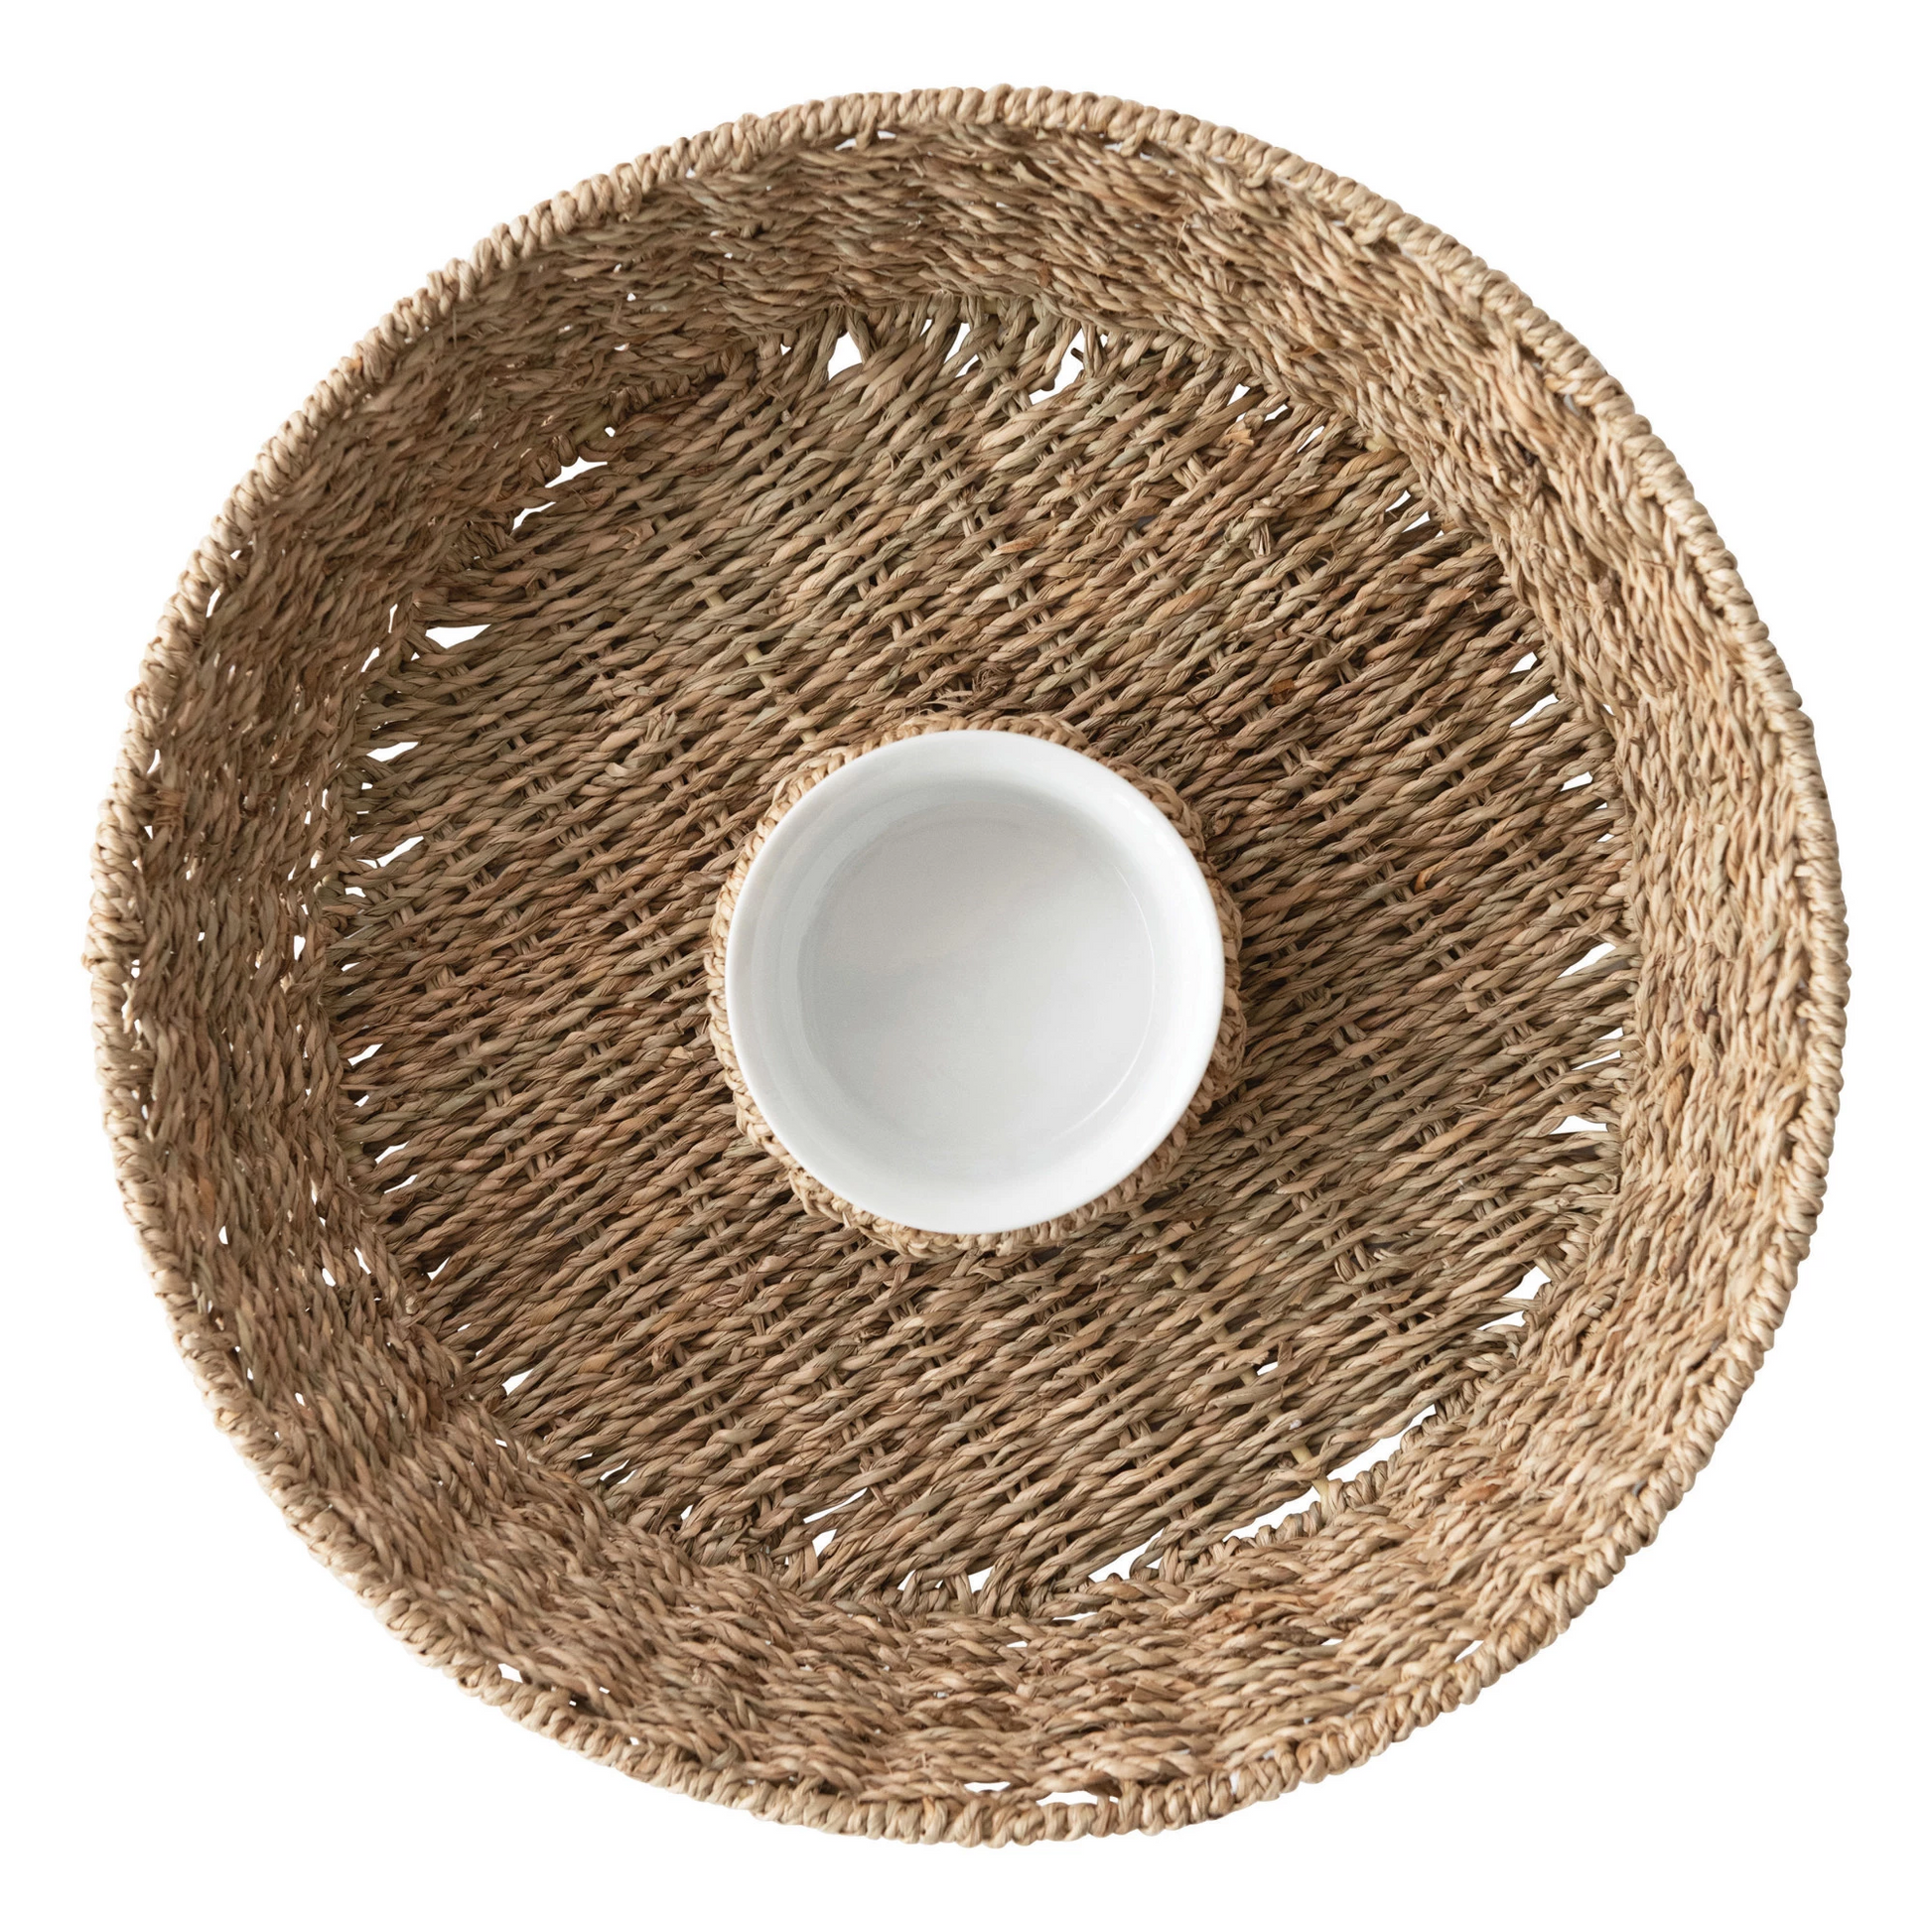 Hand-Woven Seagrass Round Chip & Dip Set with 8oz. Ceramic Bowl - 15-in - Mellow Monkey